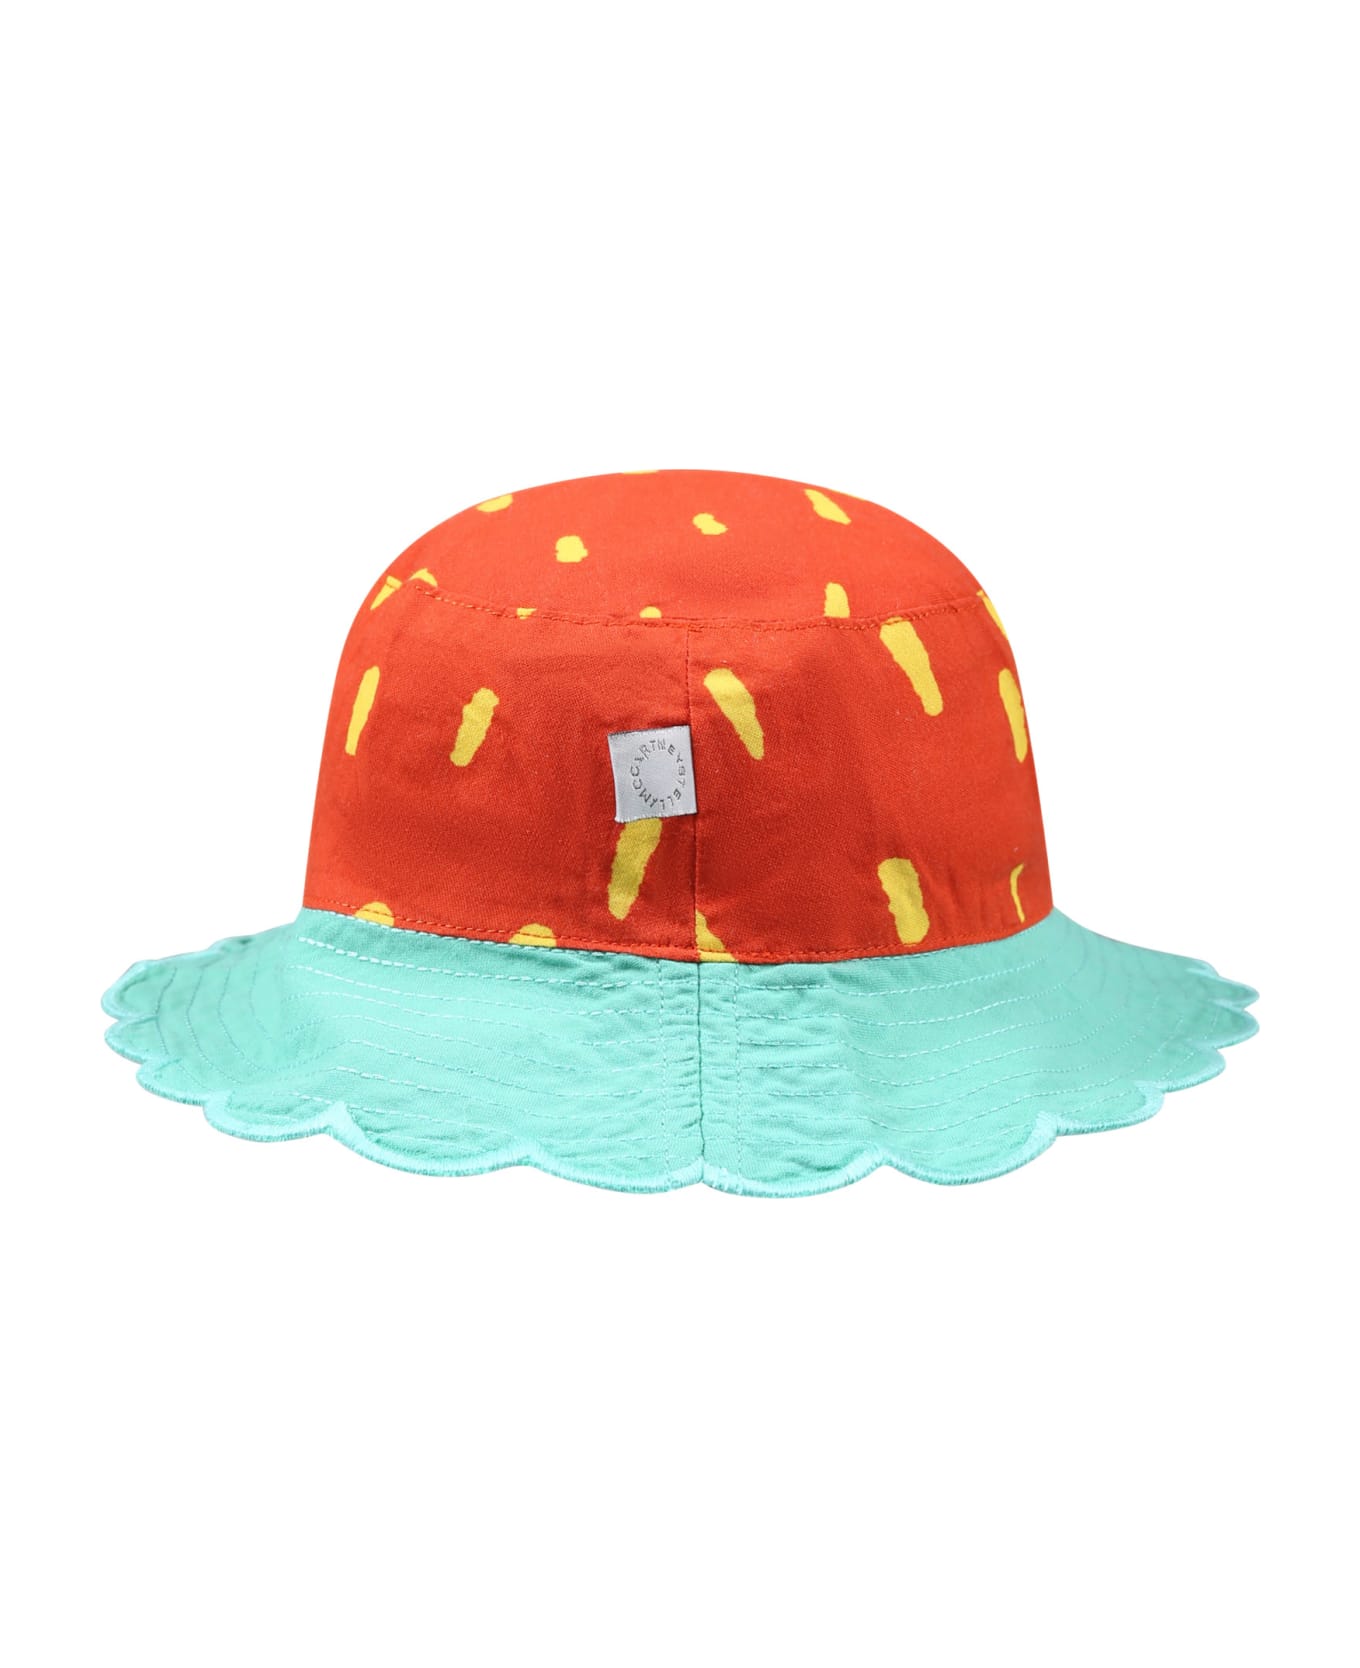 Stella McCartney Kids Red Cloche For Baby Girl With All-over Yellow Print - Red